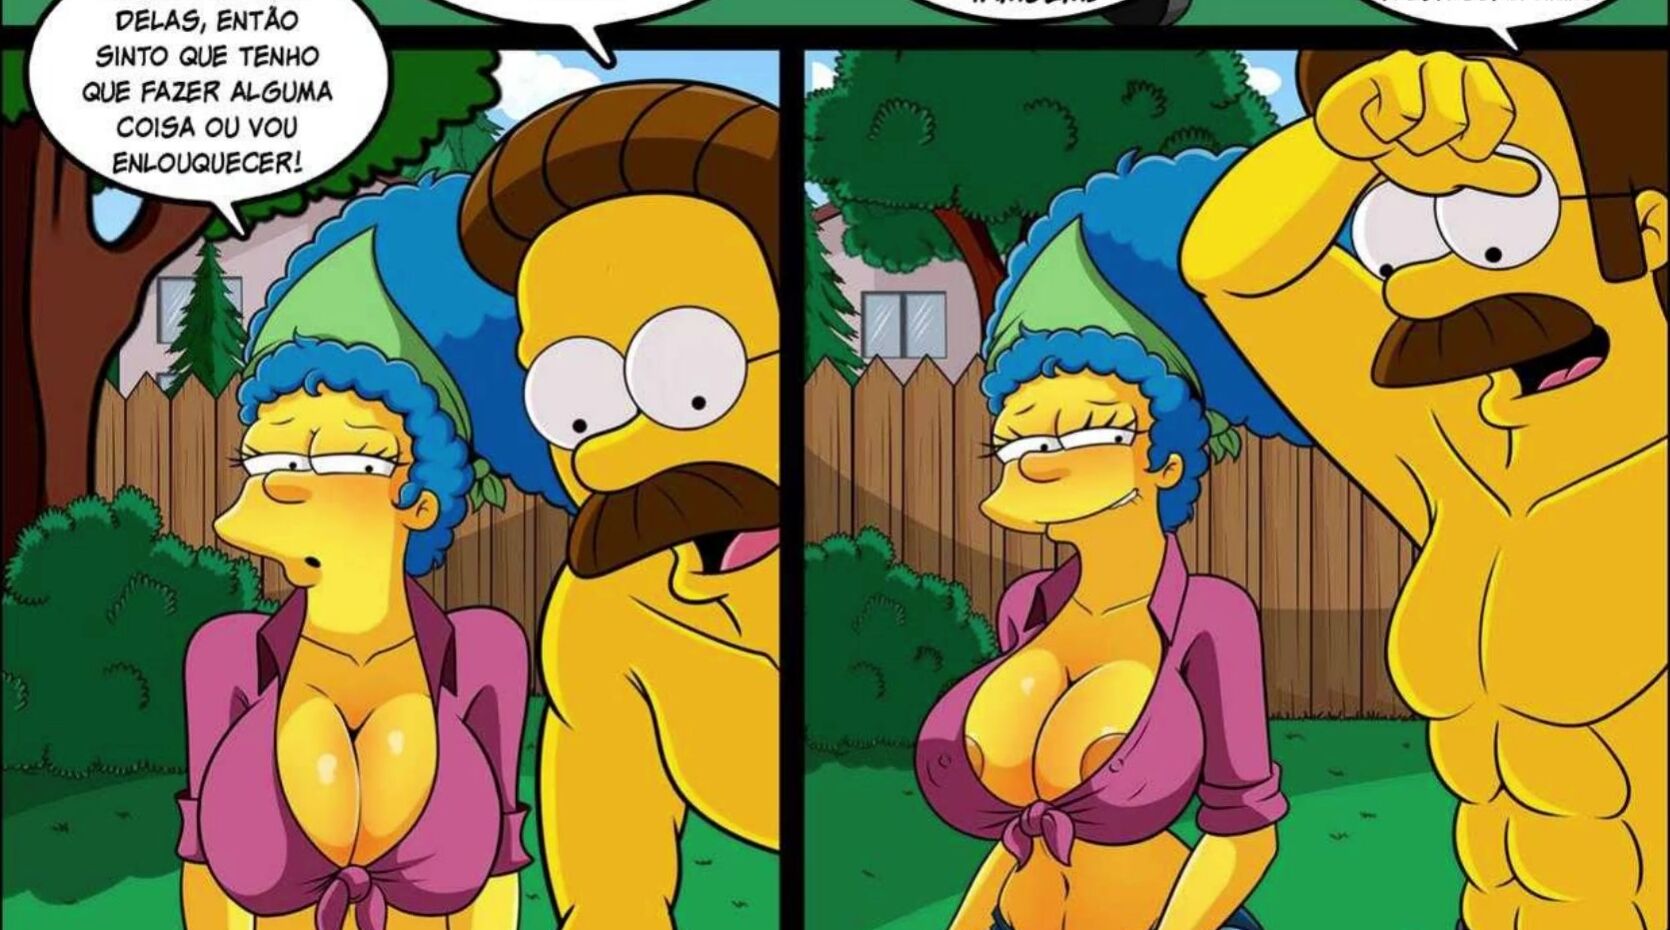 Anima E Xxx Adult Toons Drawings - Parody porn stories - The Simpsons, Ned Flanders and Marge Simpson -  CartoonPorn.com